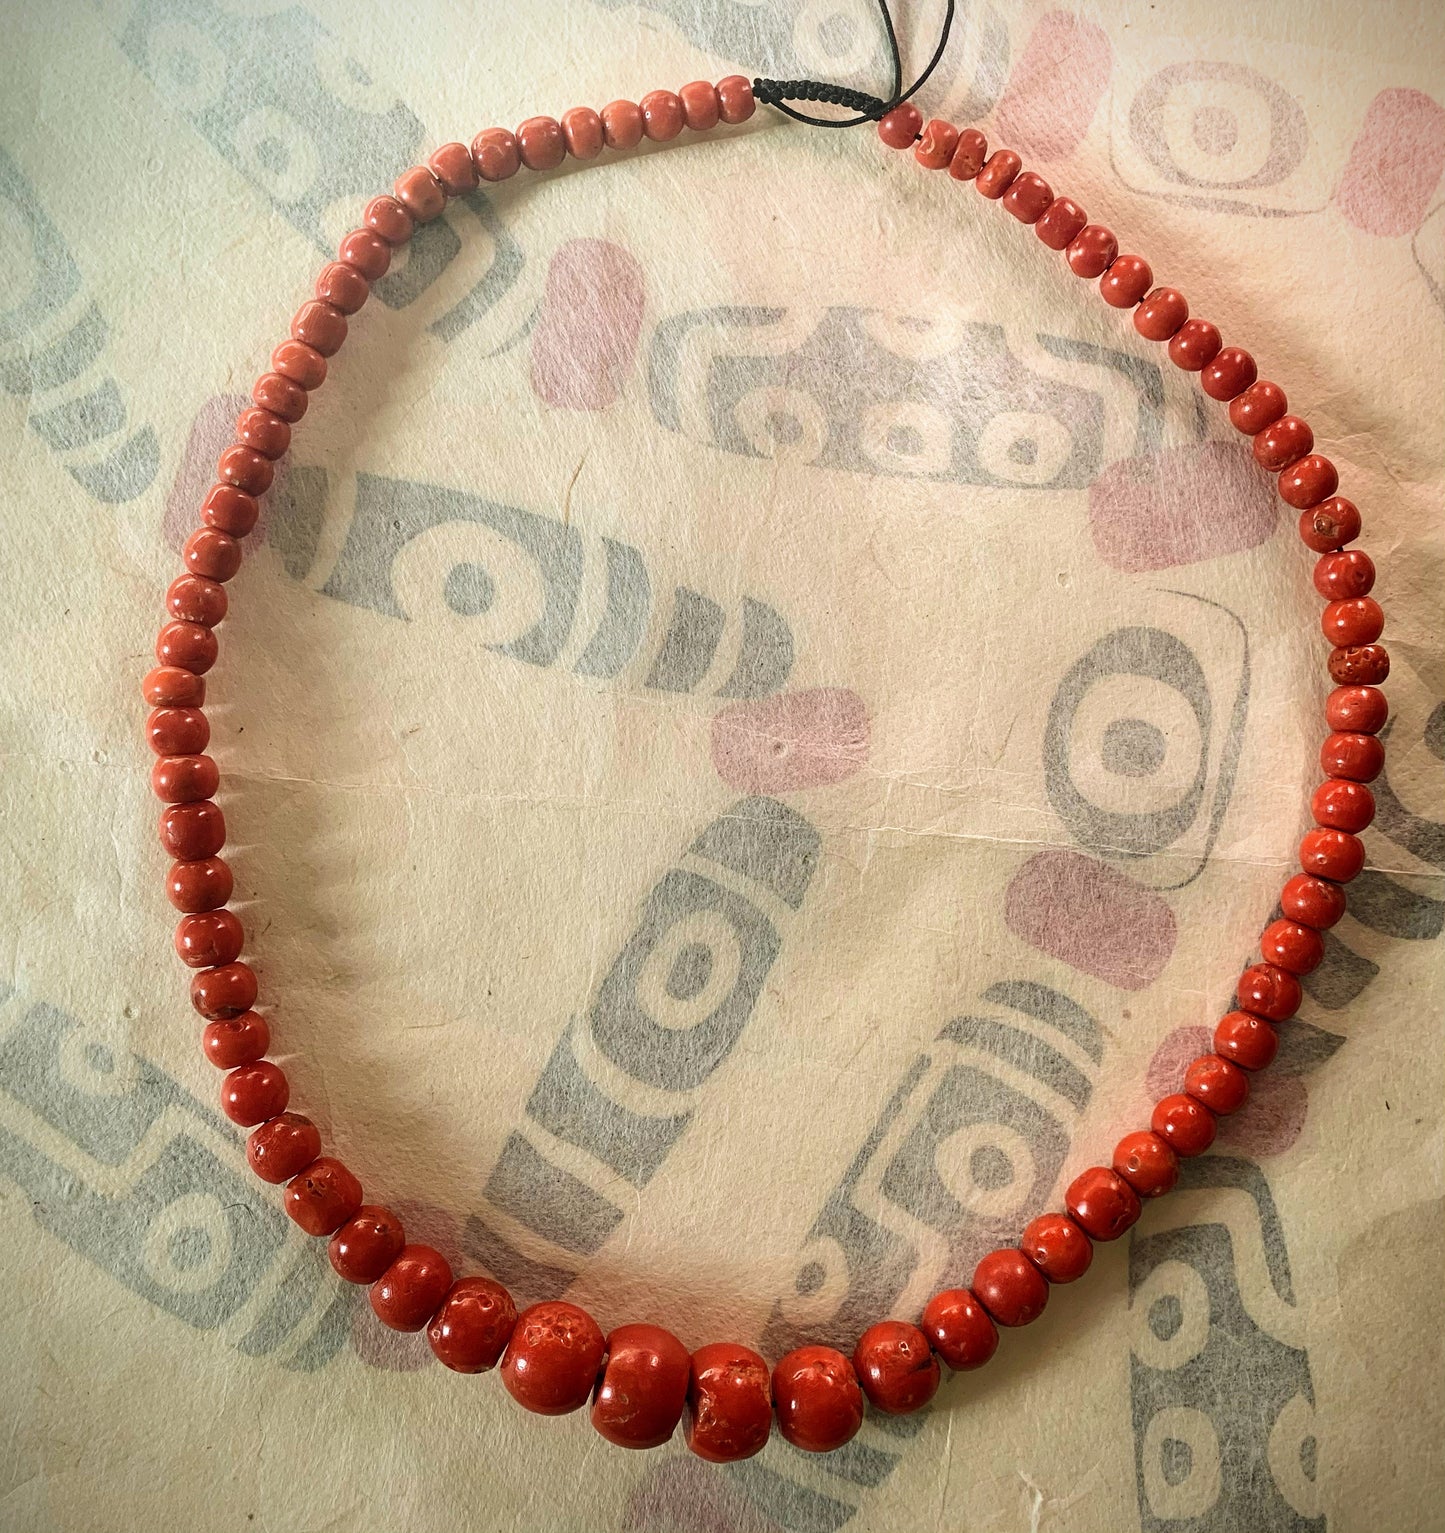 A necklace with antique coral beads